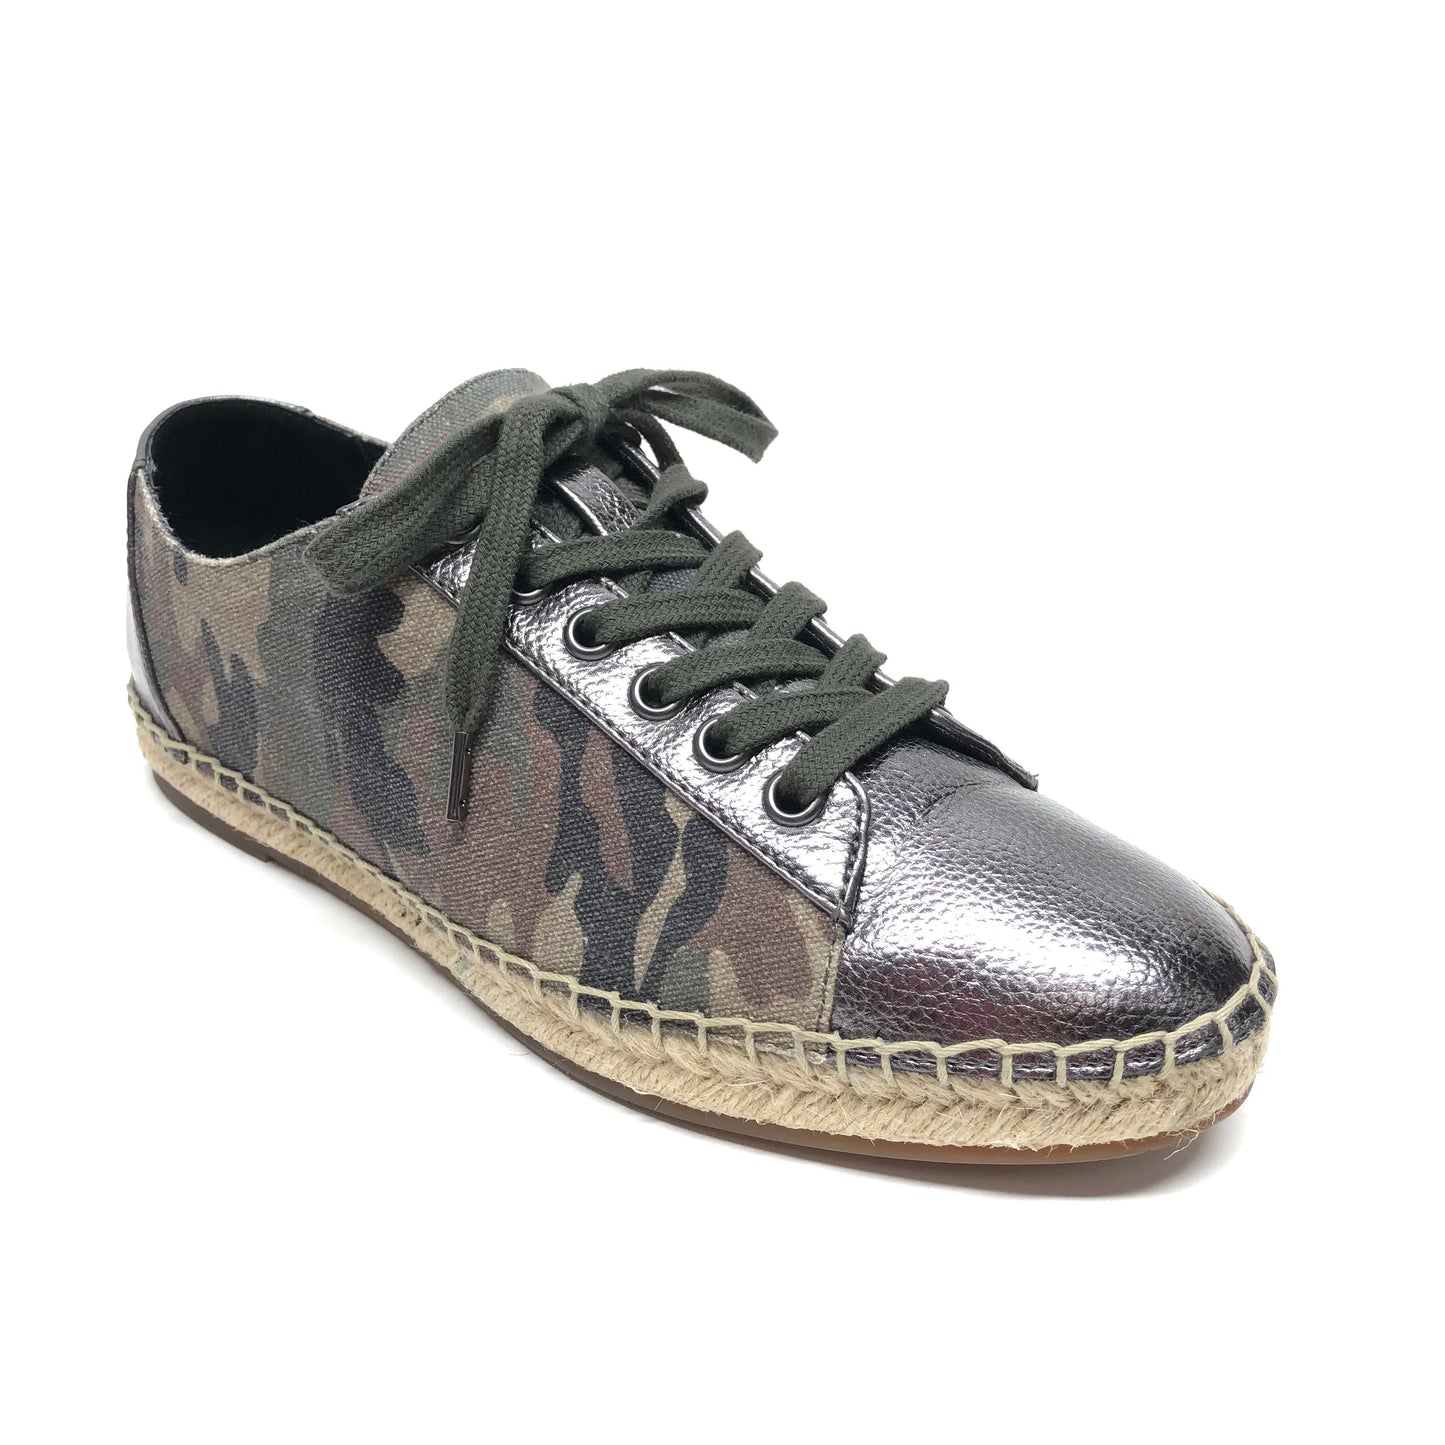 Camouflage Print Shoes Sneakers Splendid, Size 7.5